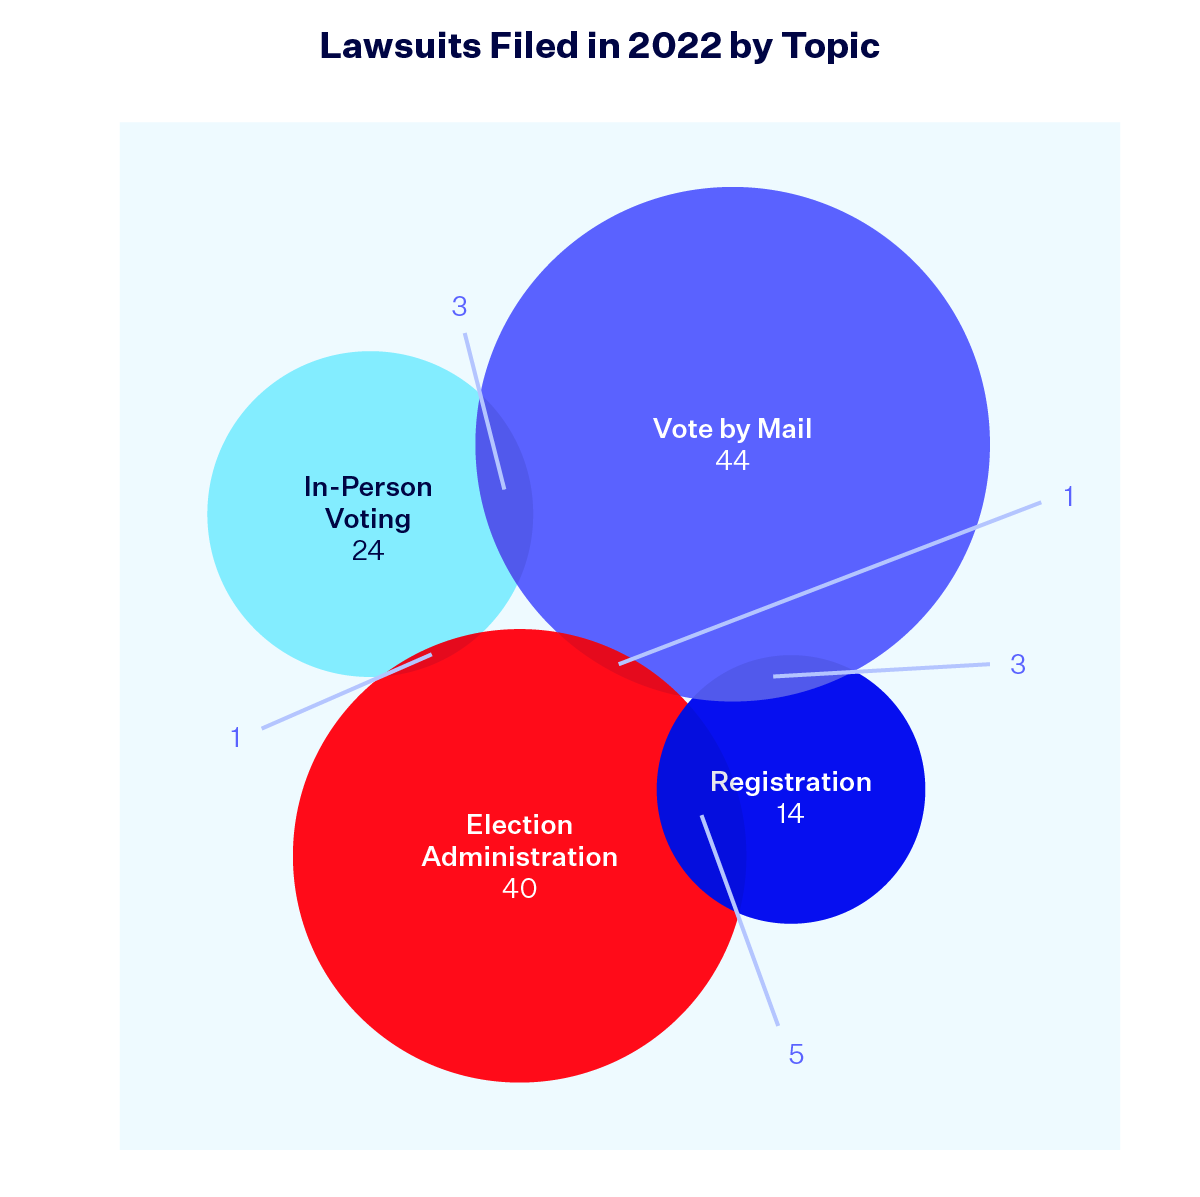 A four circle Venn diagram titled "Lawsuits Filed in 2022 by Topic." The circles include Vote by Mail (44), Election Administration (40), In-Person Voting (24) and Registration (14), with just a small number of overlapping lawsuits.